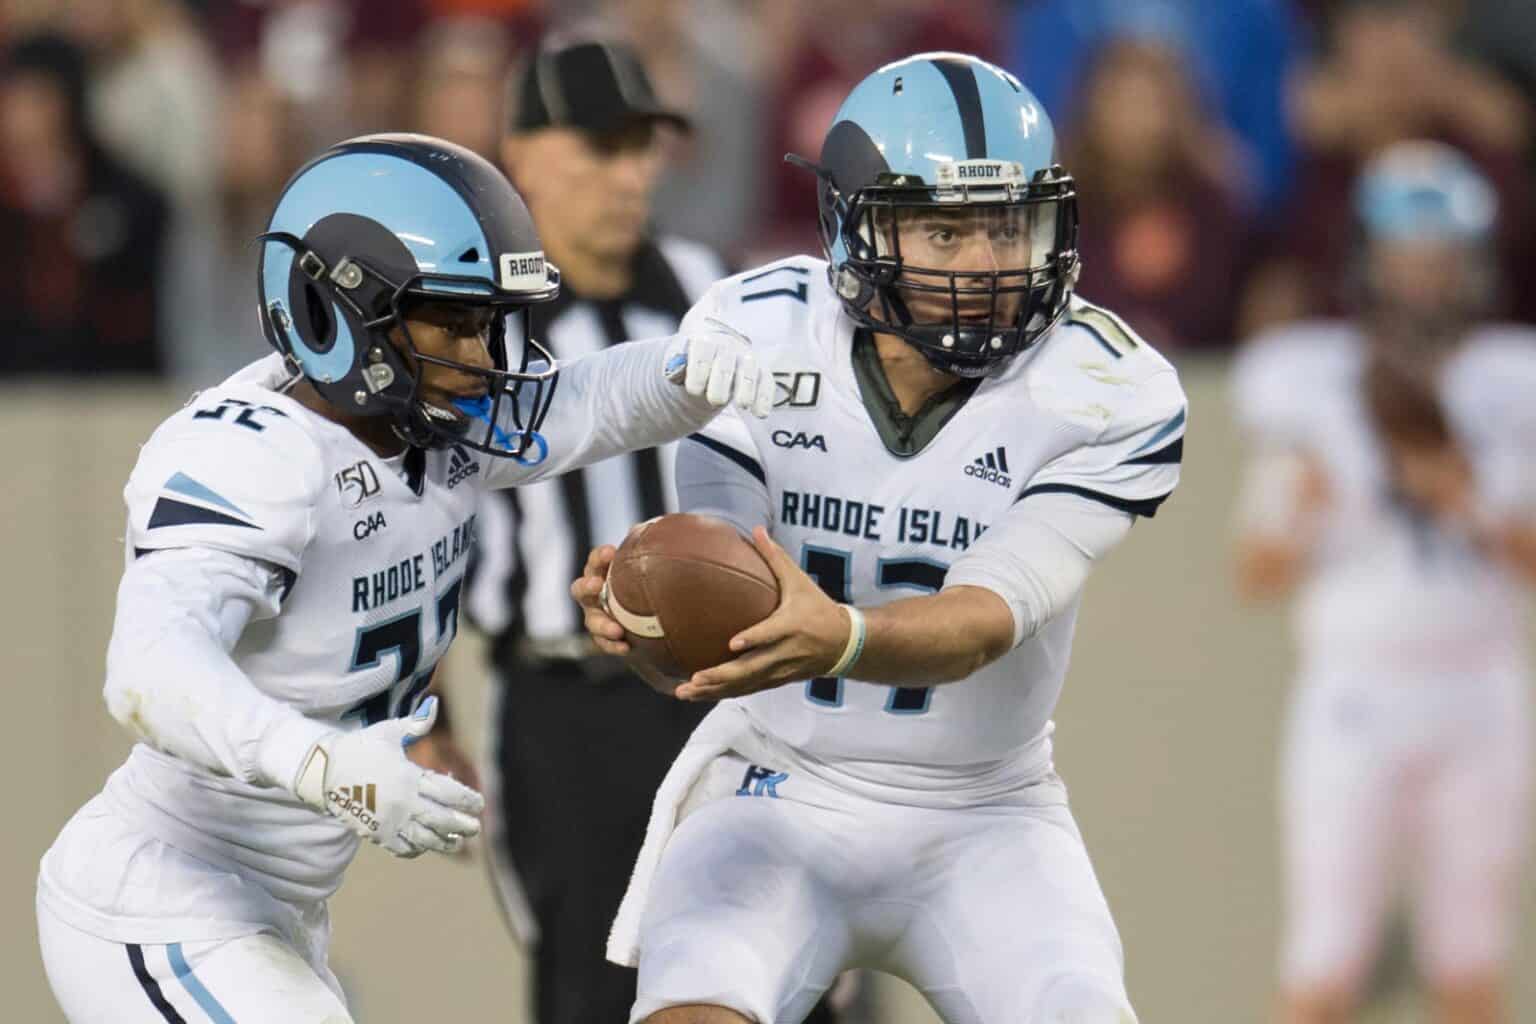 Rhode Island adds Bryant to Spring 2021 football schedule